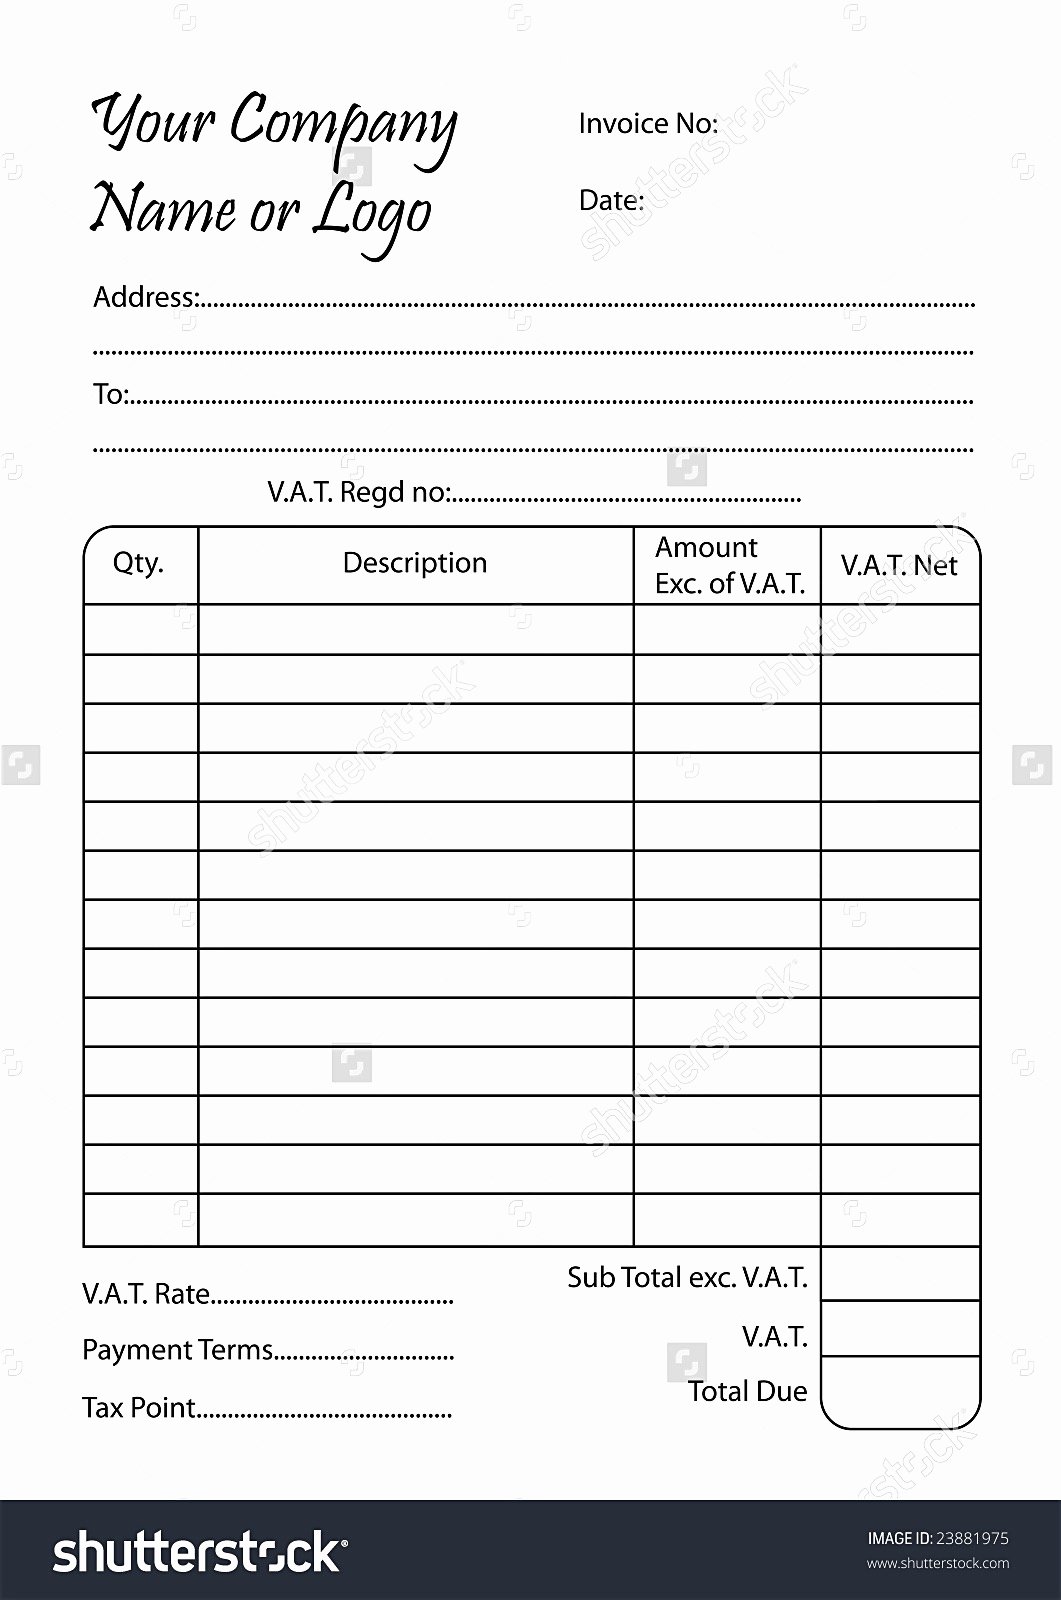 Blank Invoice Template Free Awesome Bill Receipt Mughals